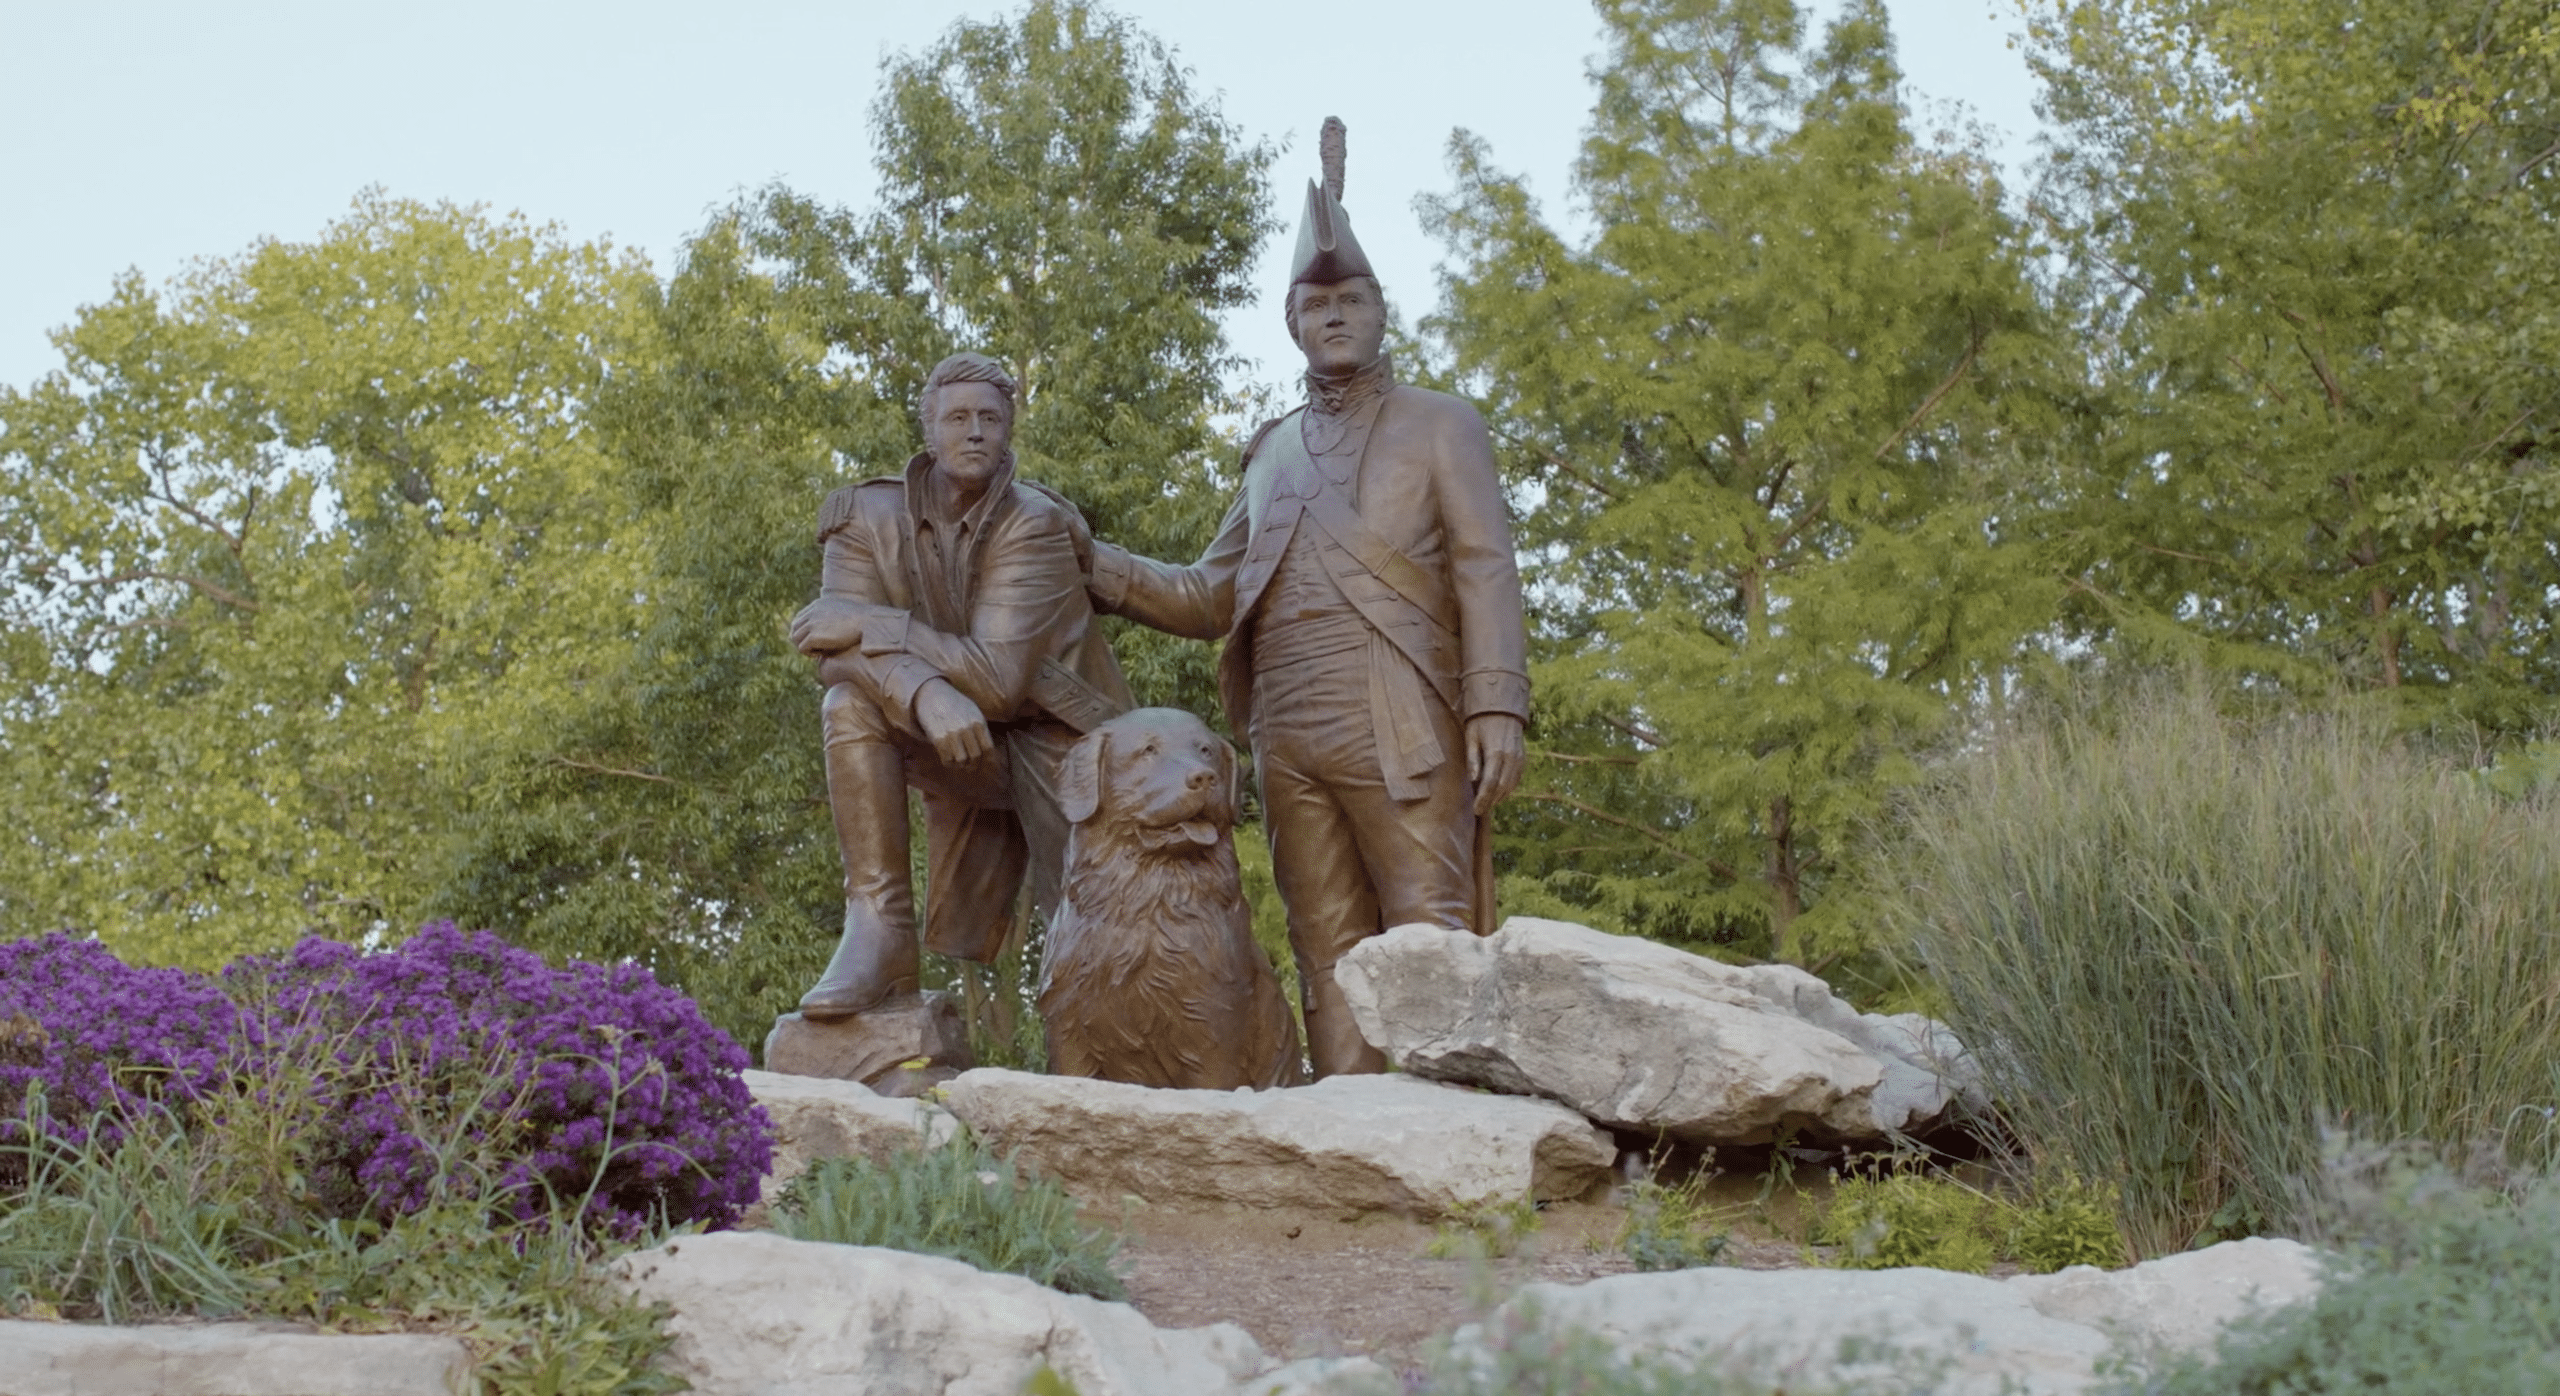 Lewis & Clark statue in Frontier Park, St. Charles MO